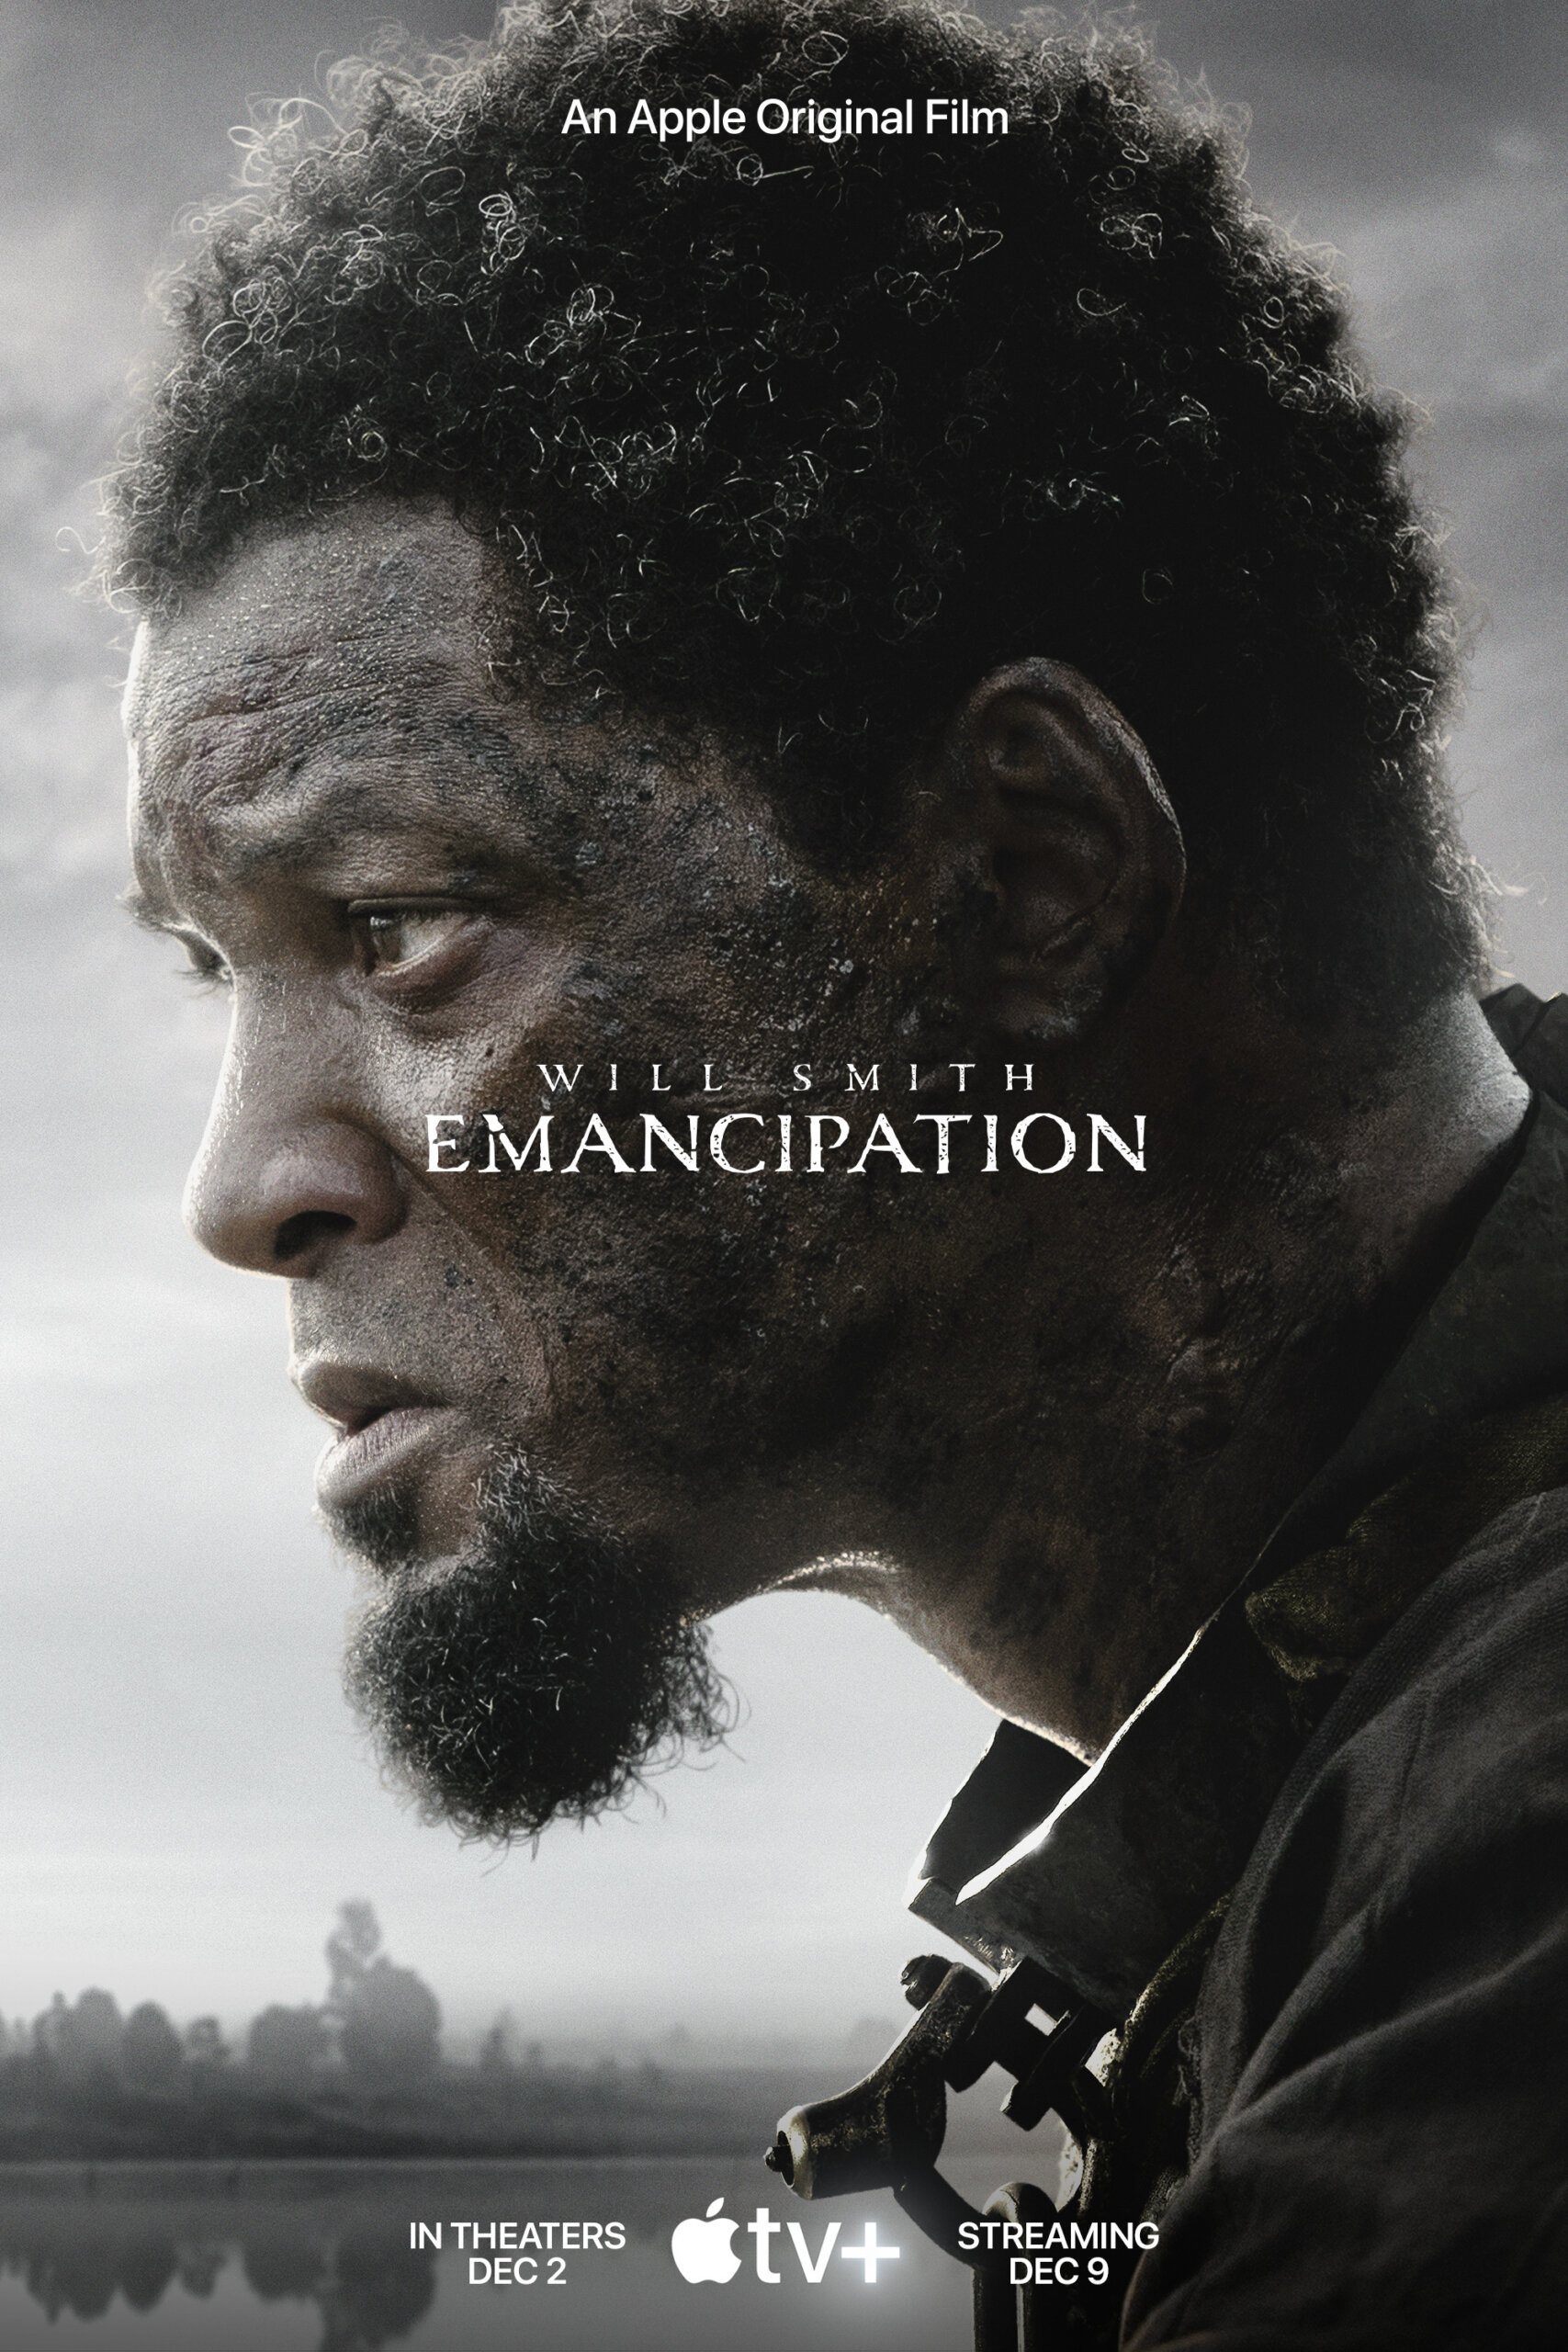 1st Trailer For Apple TV+ Original Movie 'Emancipation' Starring Will Smith